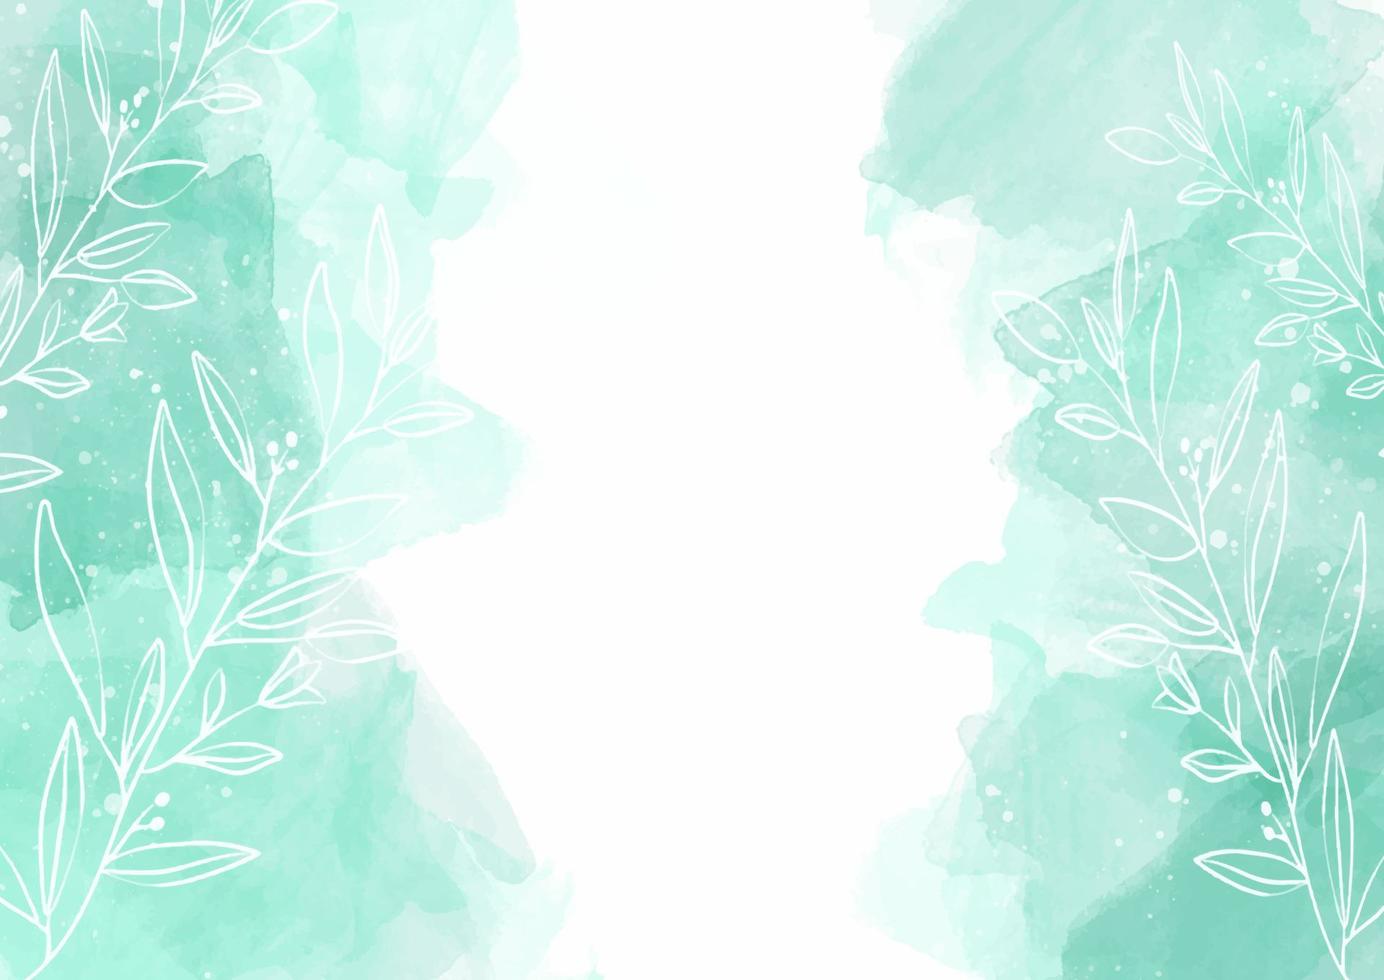 Floral design on a hand painted watercolour background vector